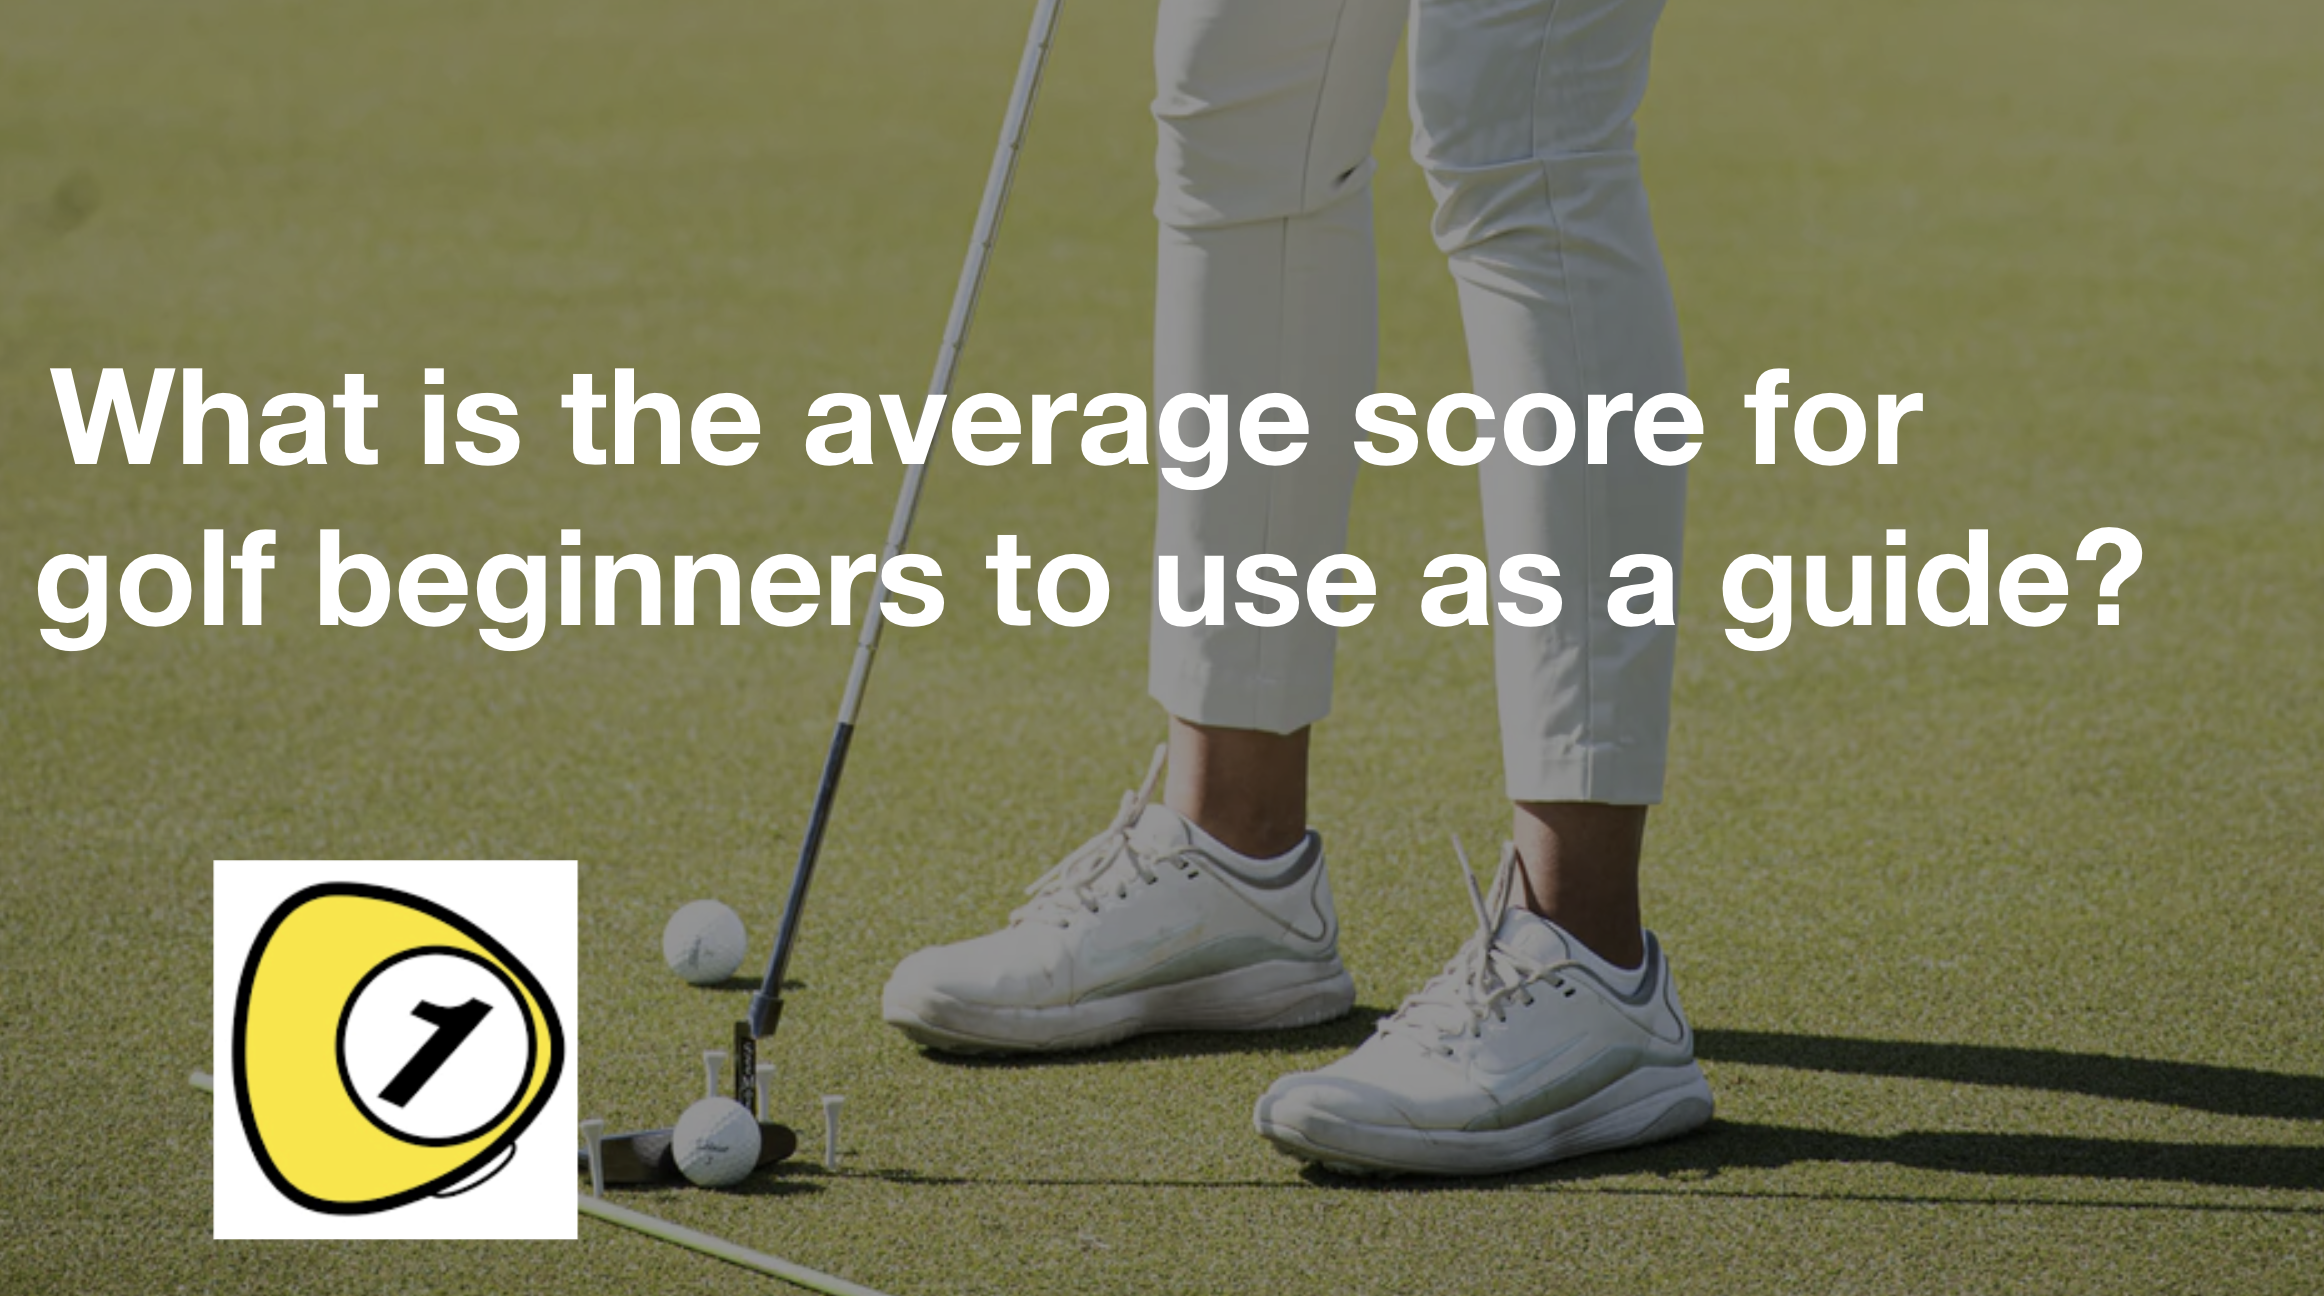 golfScoreCounterDotcom_What is the average score for golf beginners to use as a guide?